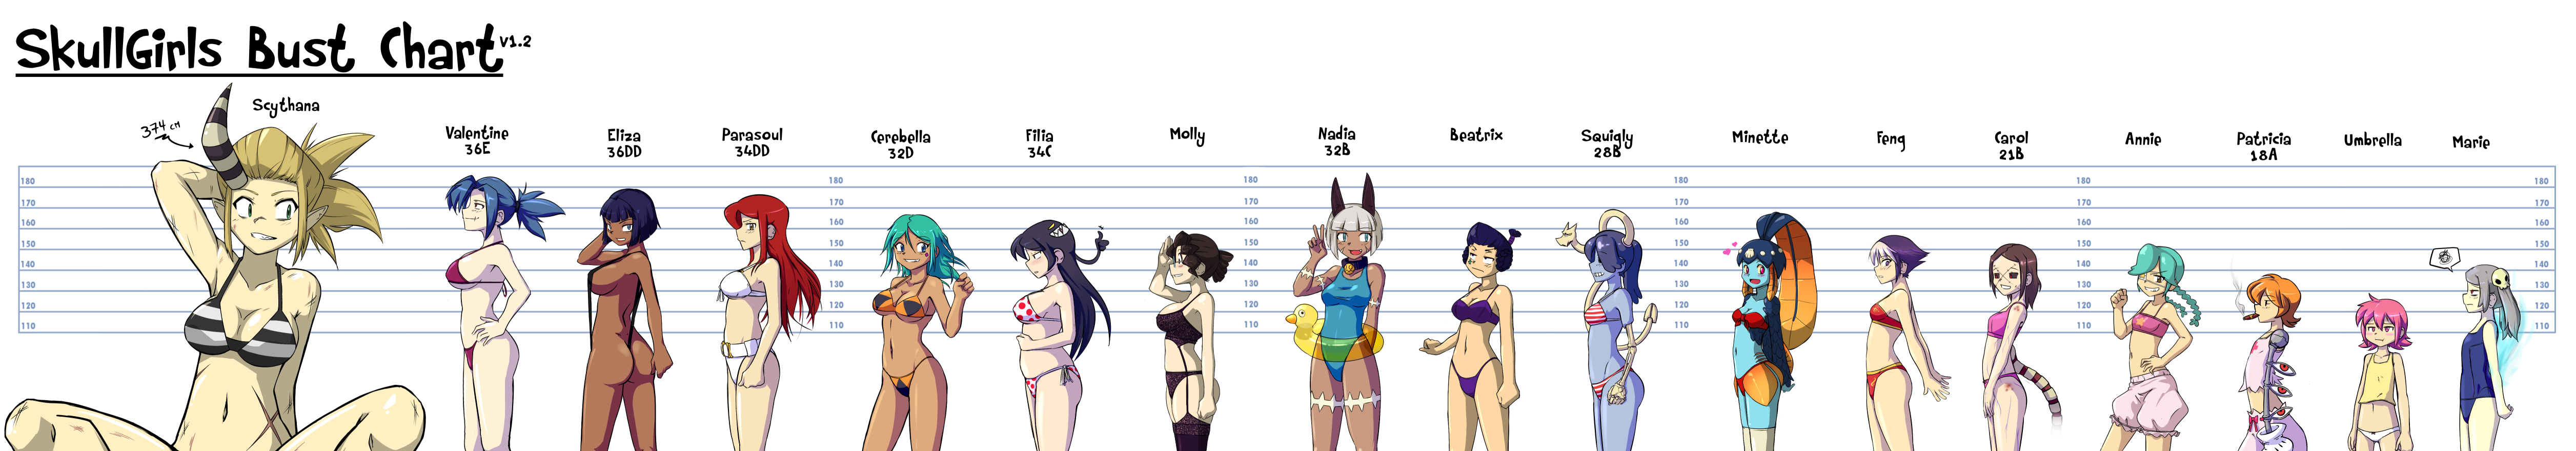 skullgirls_bust_chart_by_shadowbugx-d7uitzh.png